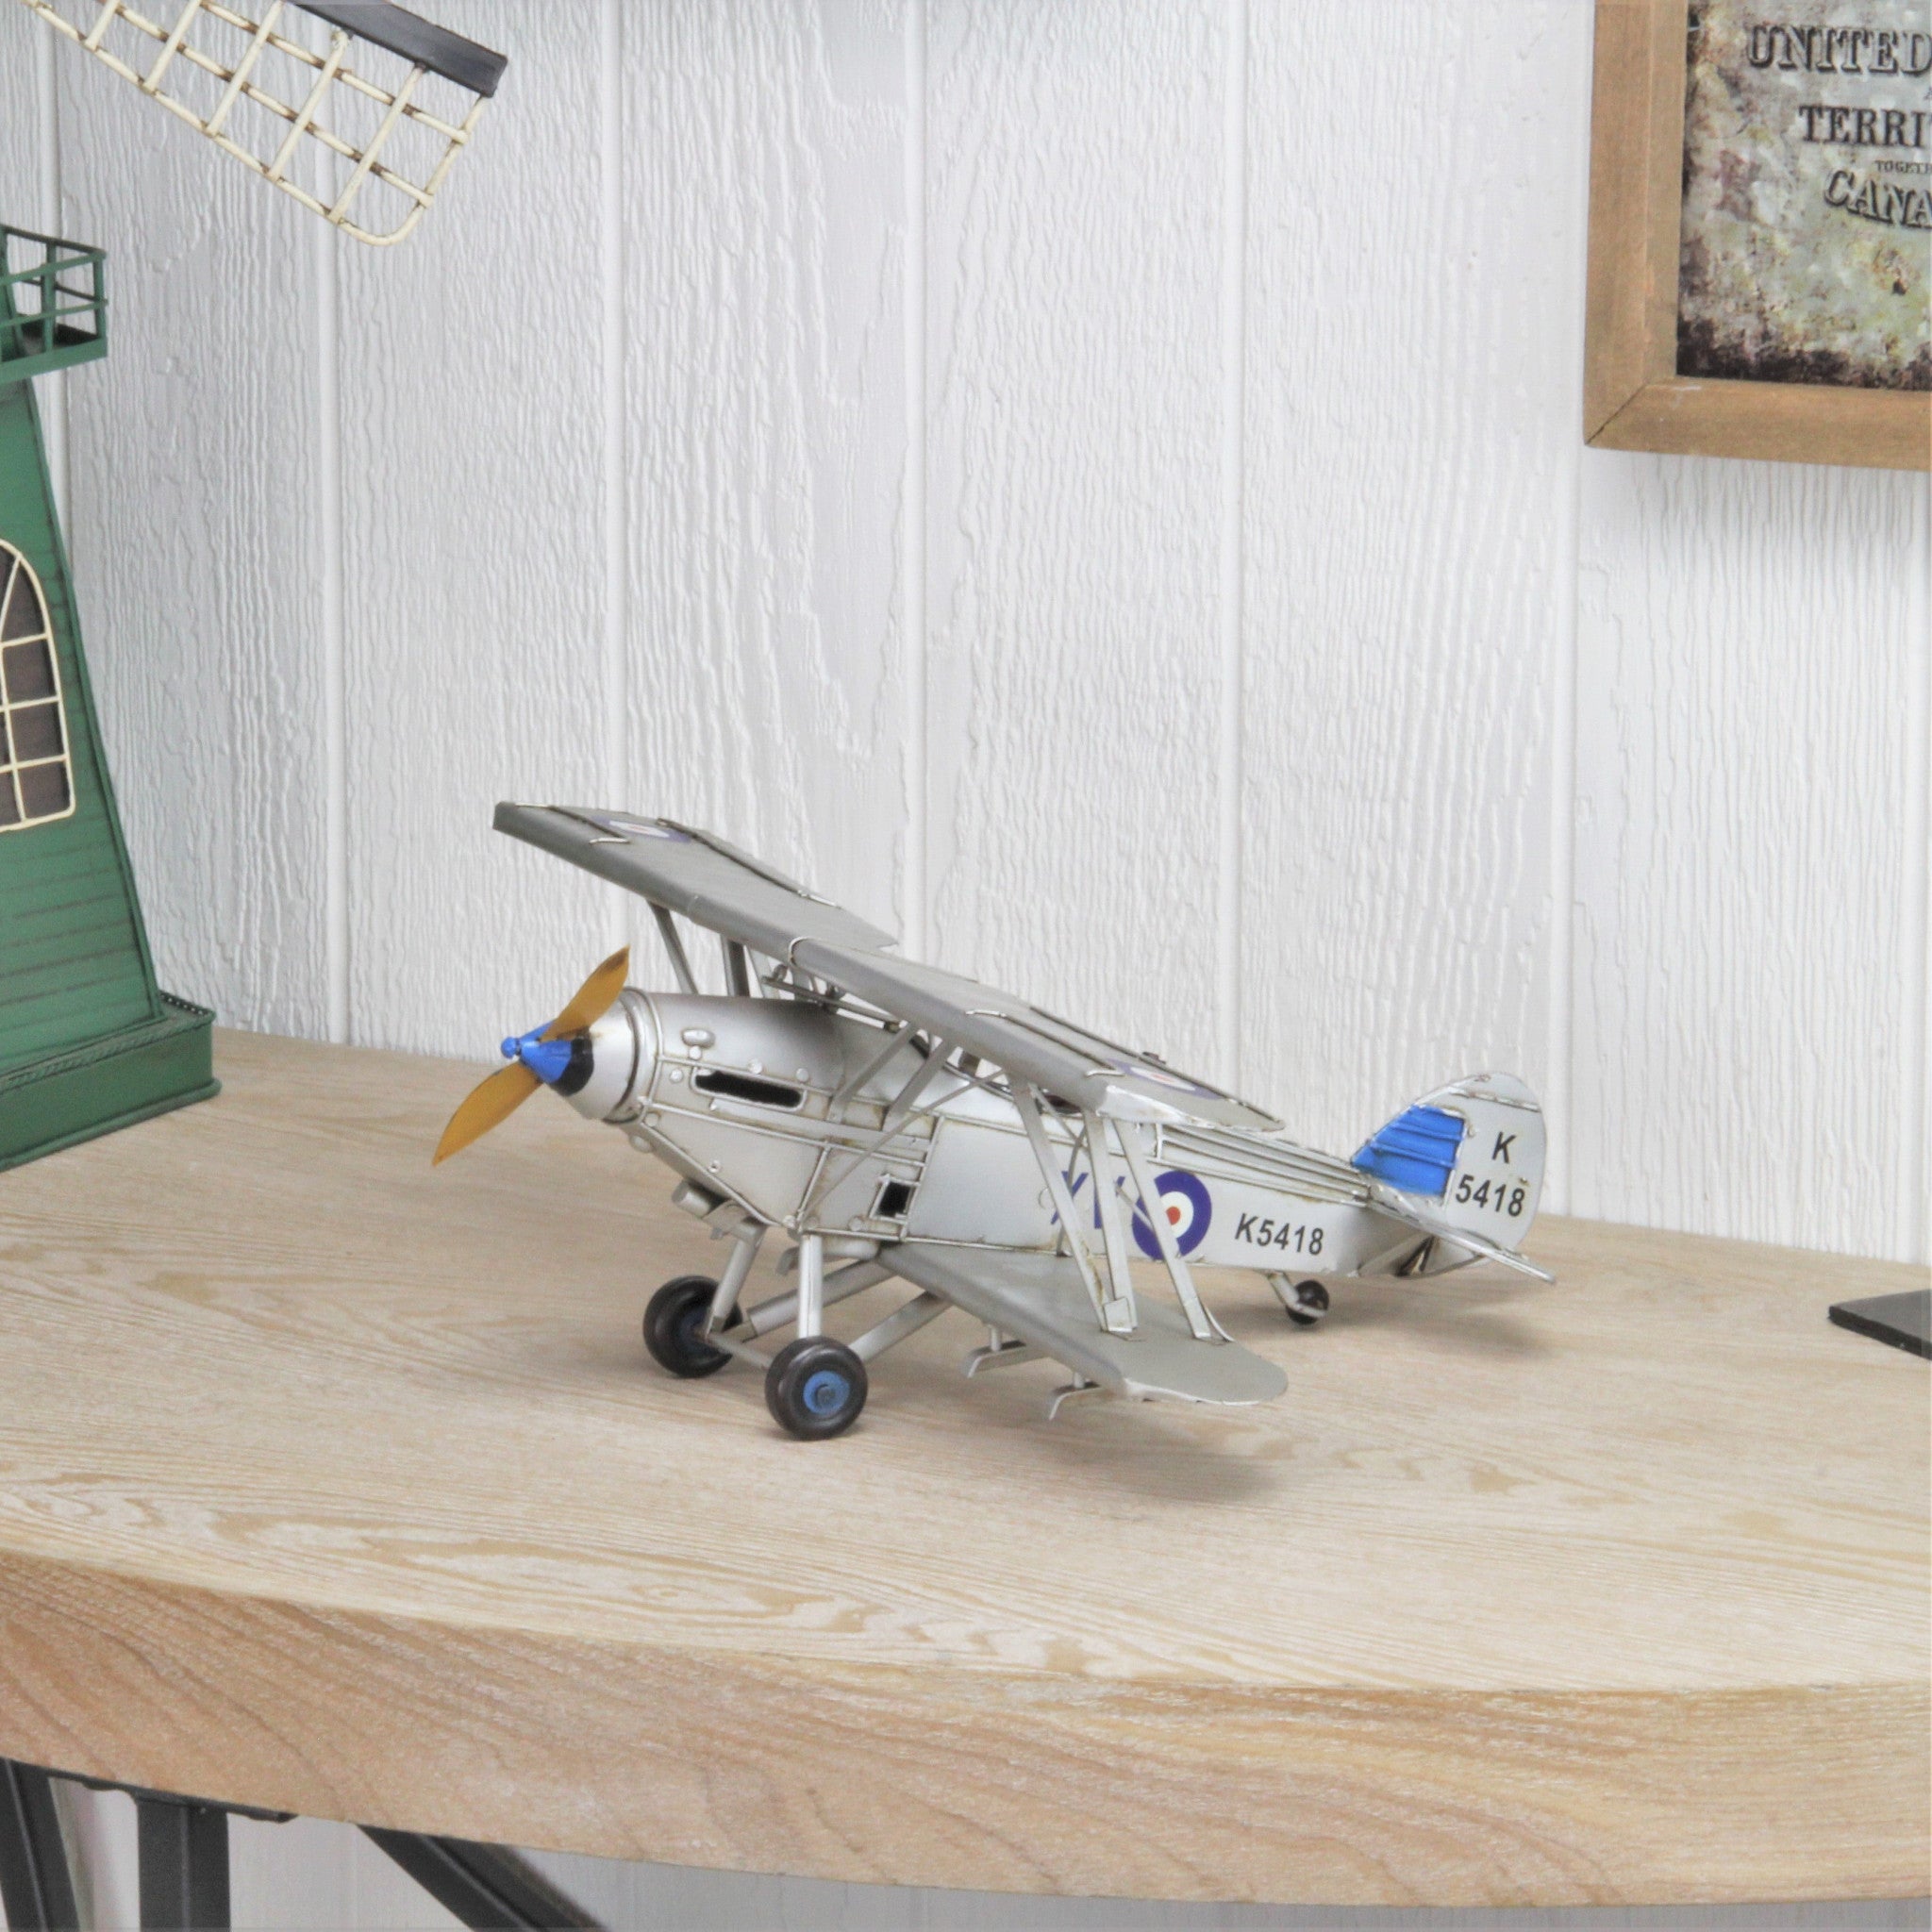 5" Blue and Gray Metal Hand Painted Model Airplane